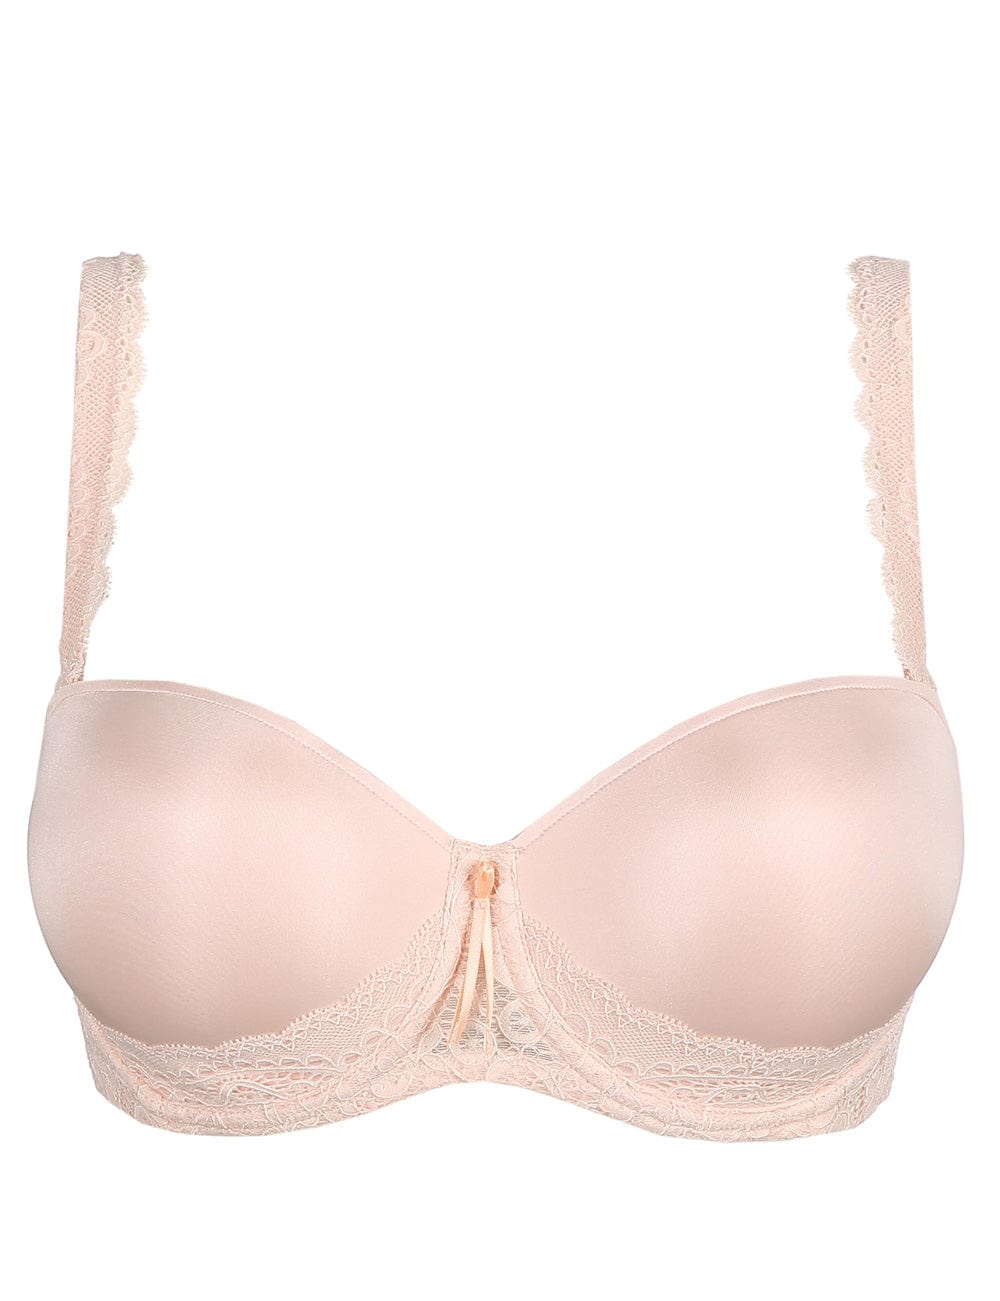 PrimaDonna Strapless and bandeau bra Deals, Sale, Clearance